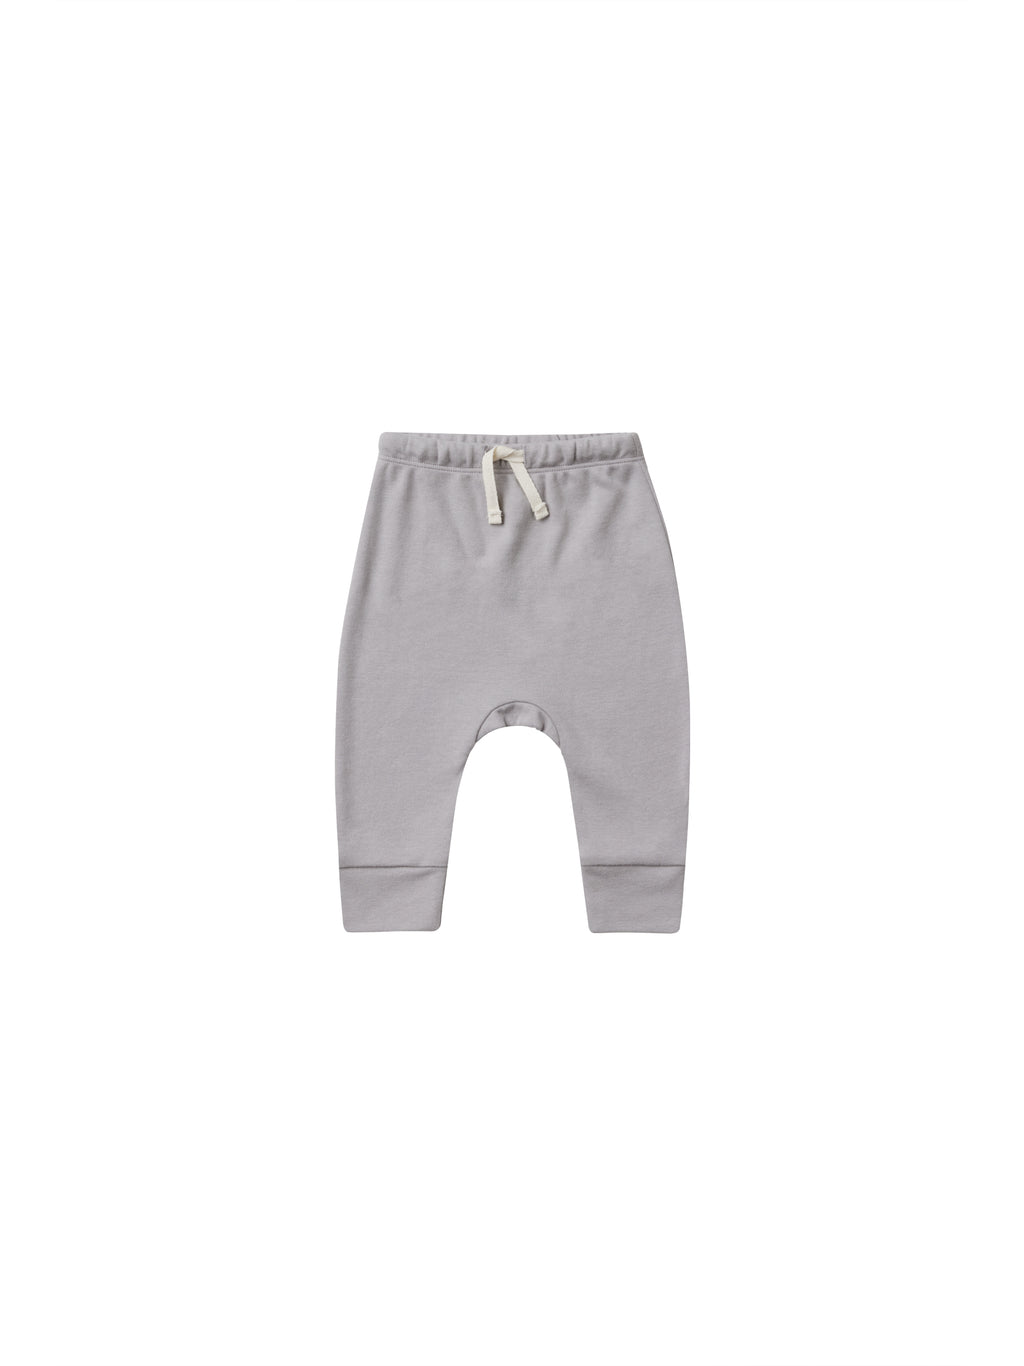 Quincy Mae Drawstring Pant - Periwinkle